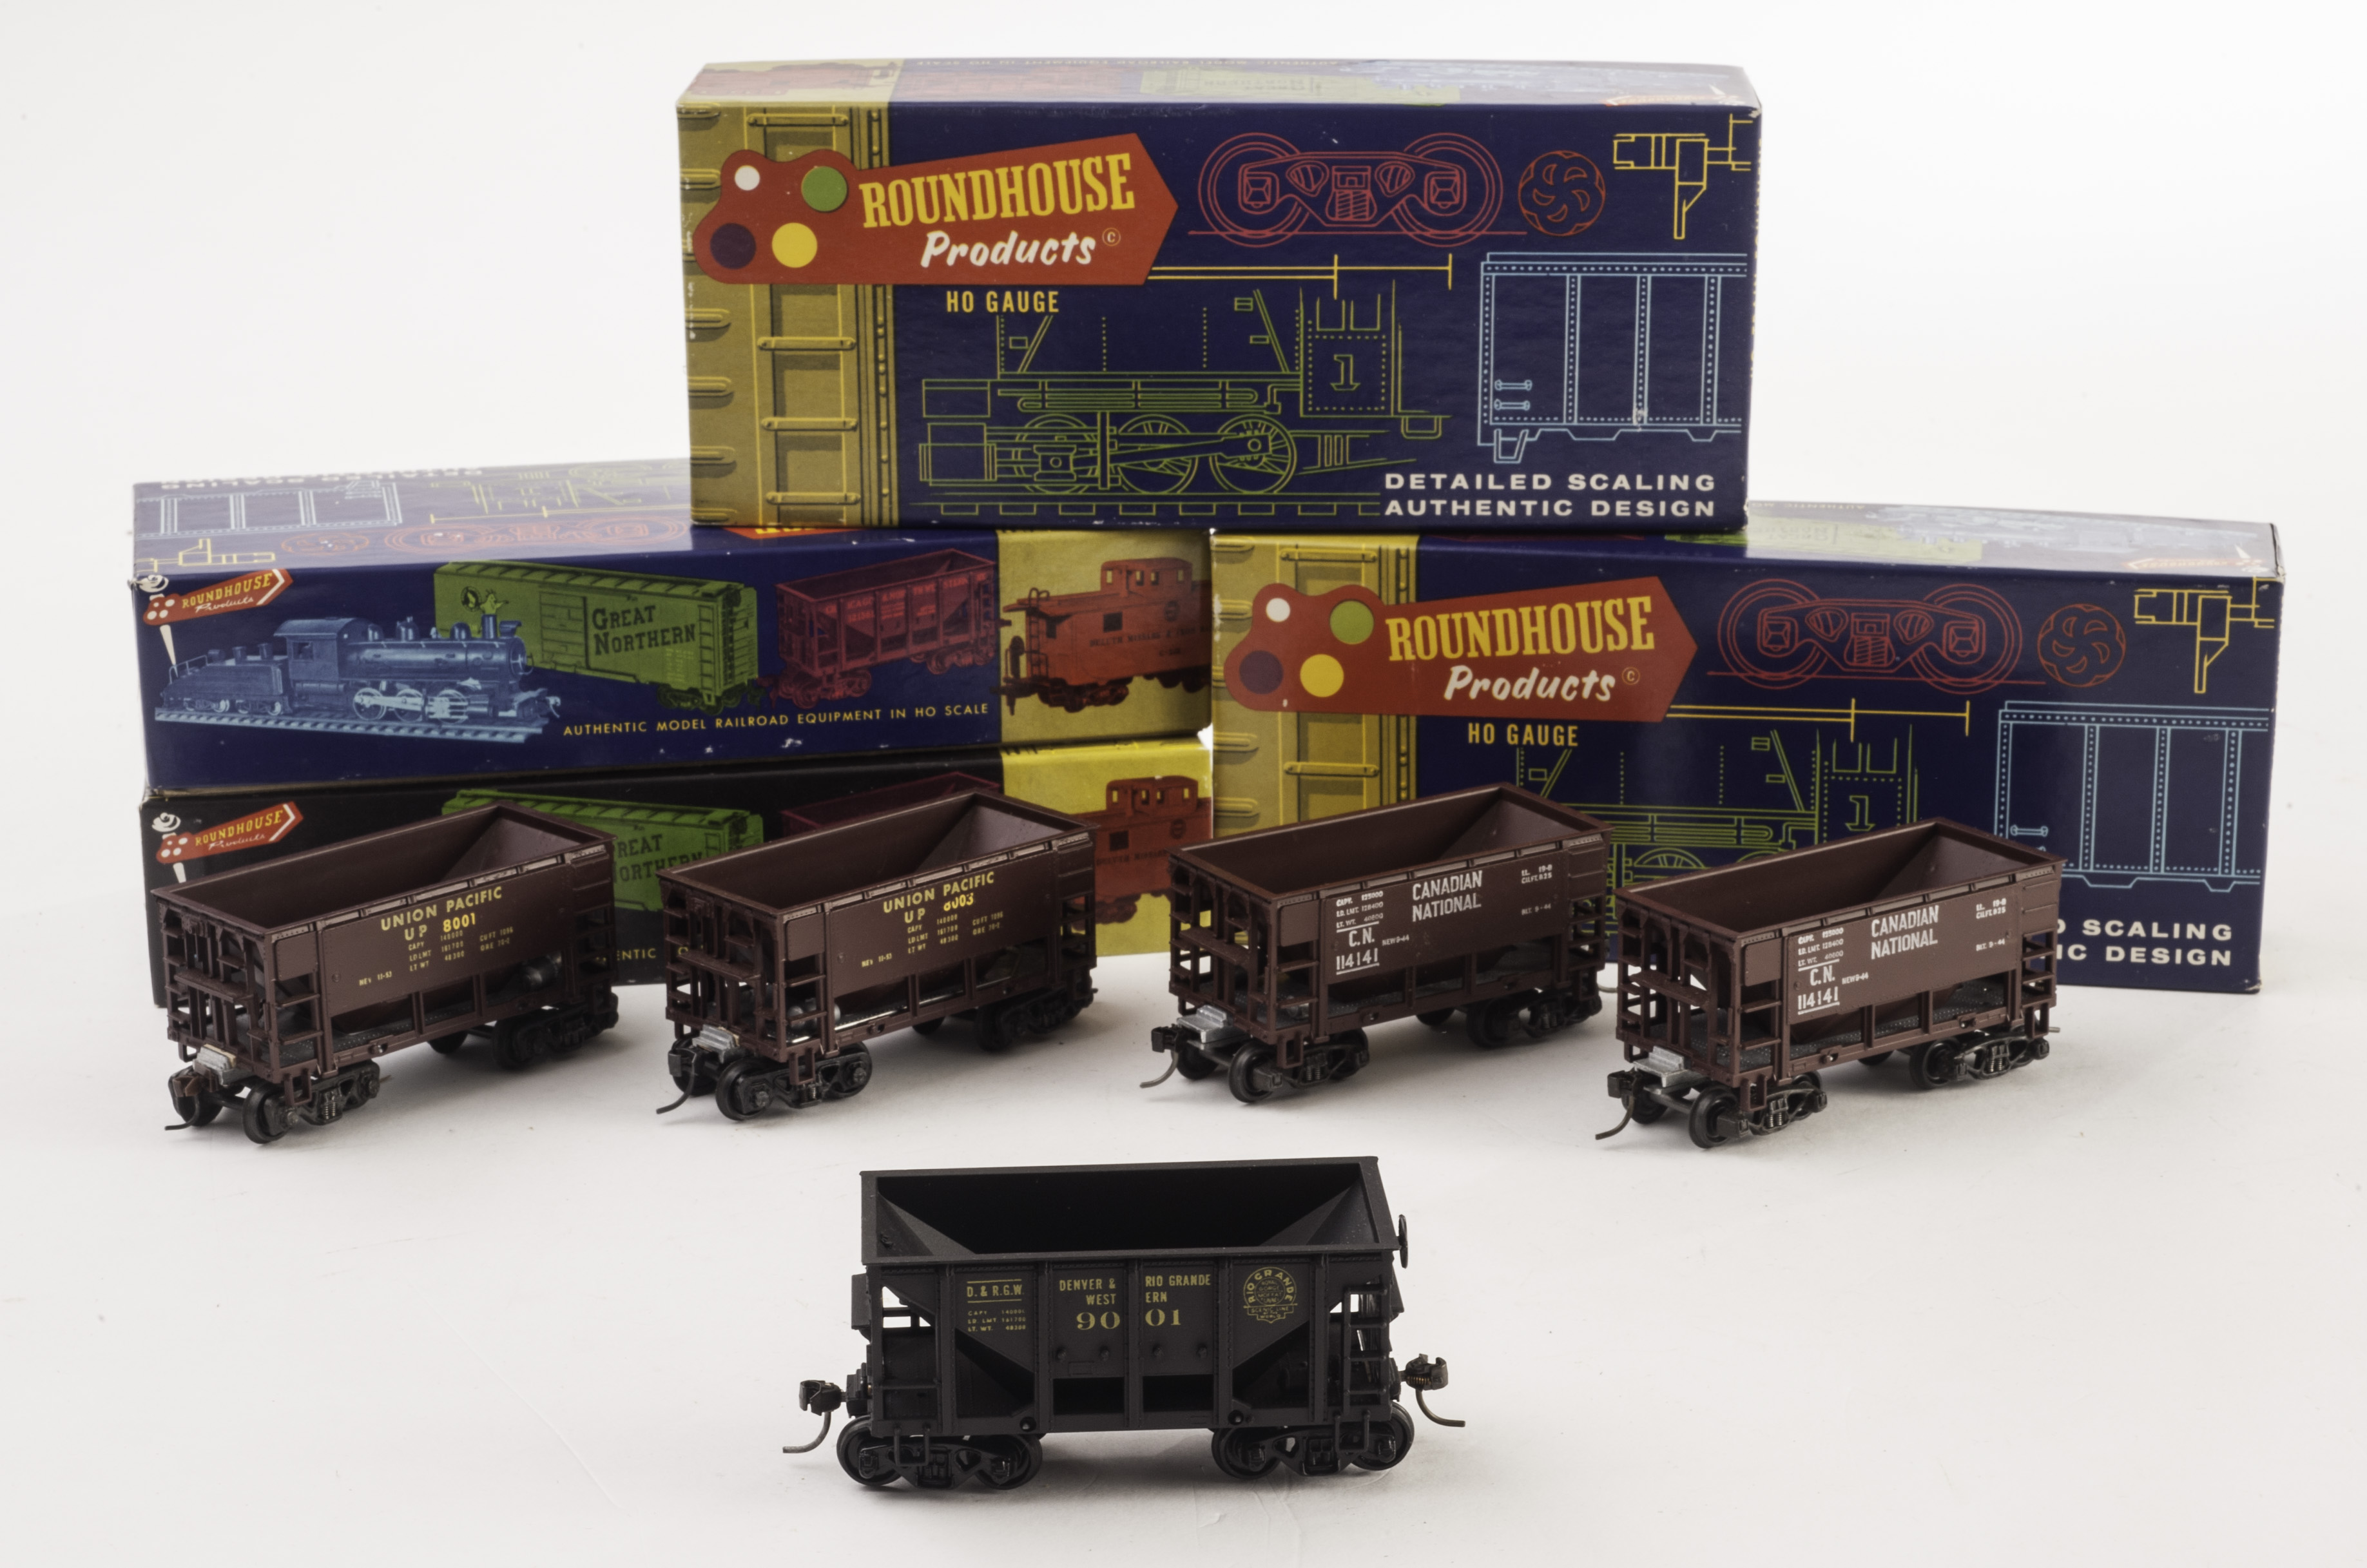 American H0 Gauge rolling stock by Roundhouse: mostly box cars, with various others including